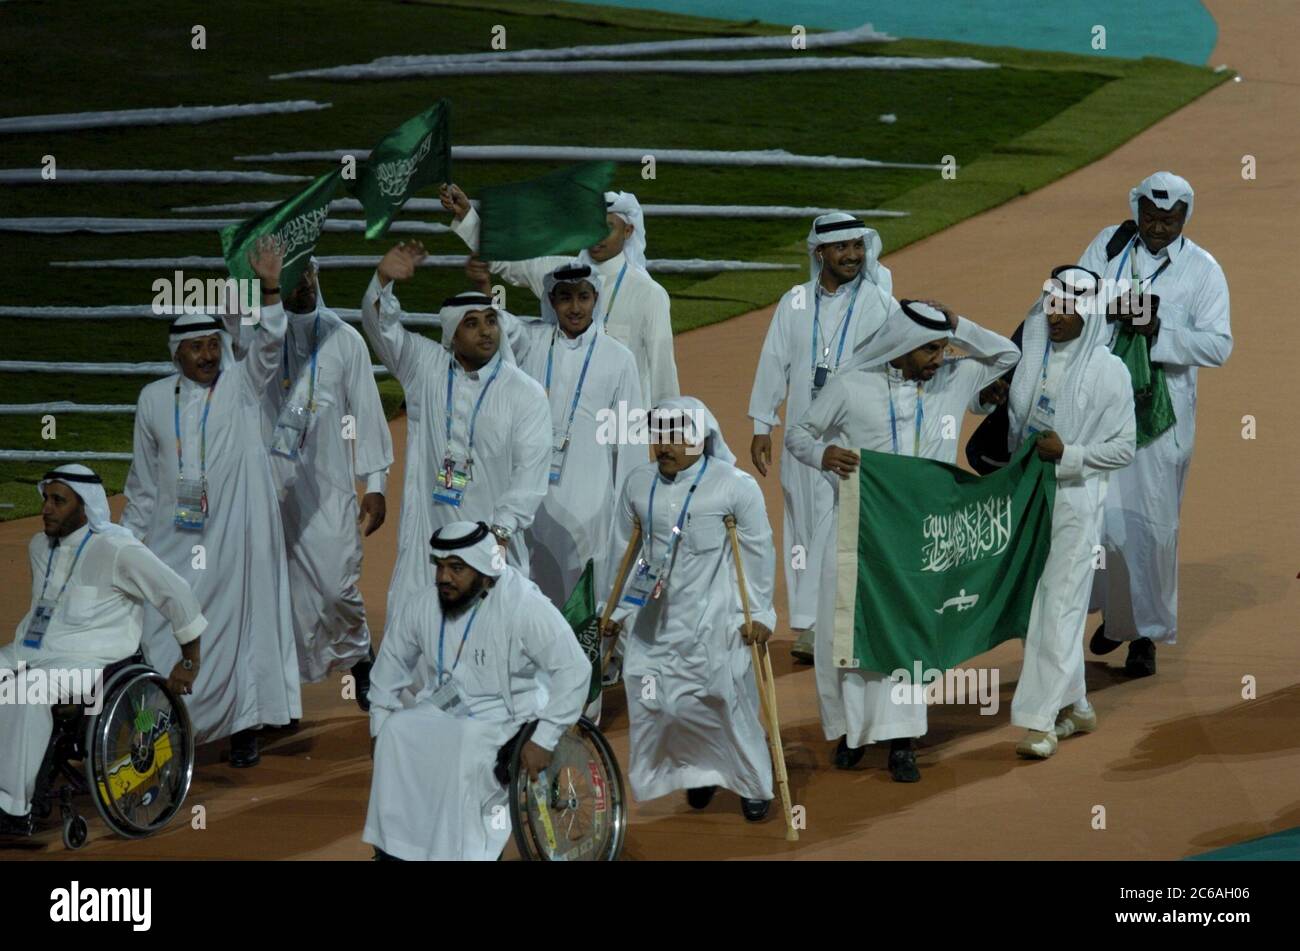 Athens, Greece  17SEP04: Opening Ceremony of the Athens 2004 Paralympic Games at Olympic Stadium.   Team from Saudi Arabia marches into the stadium.  ©Bob Daemmrich Stock Photo